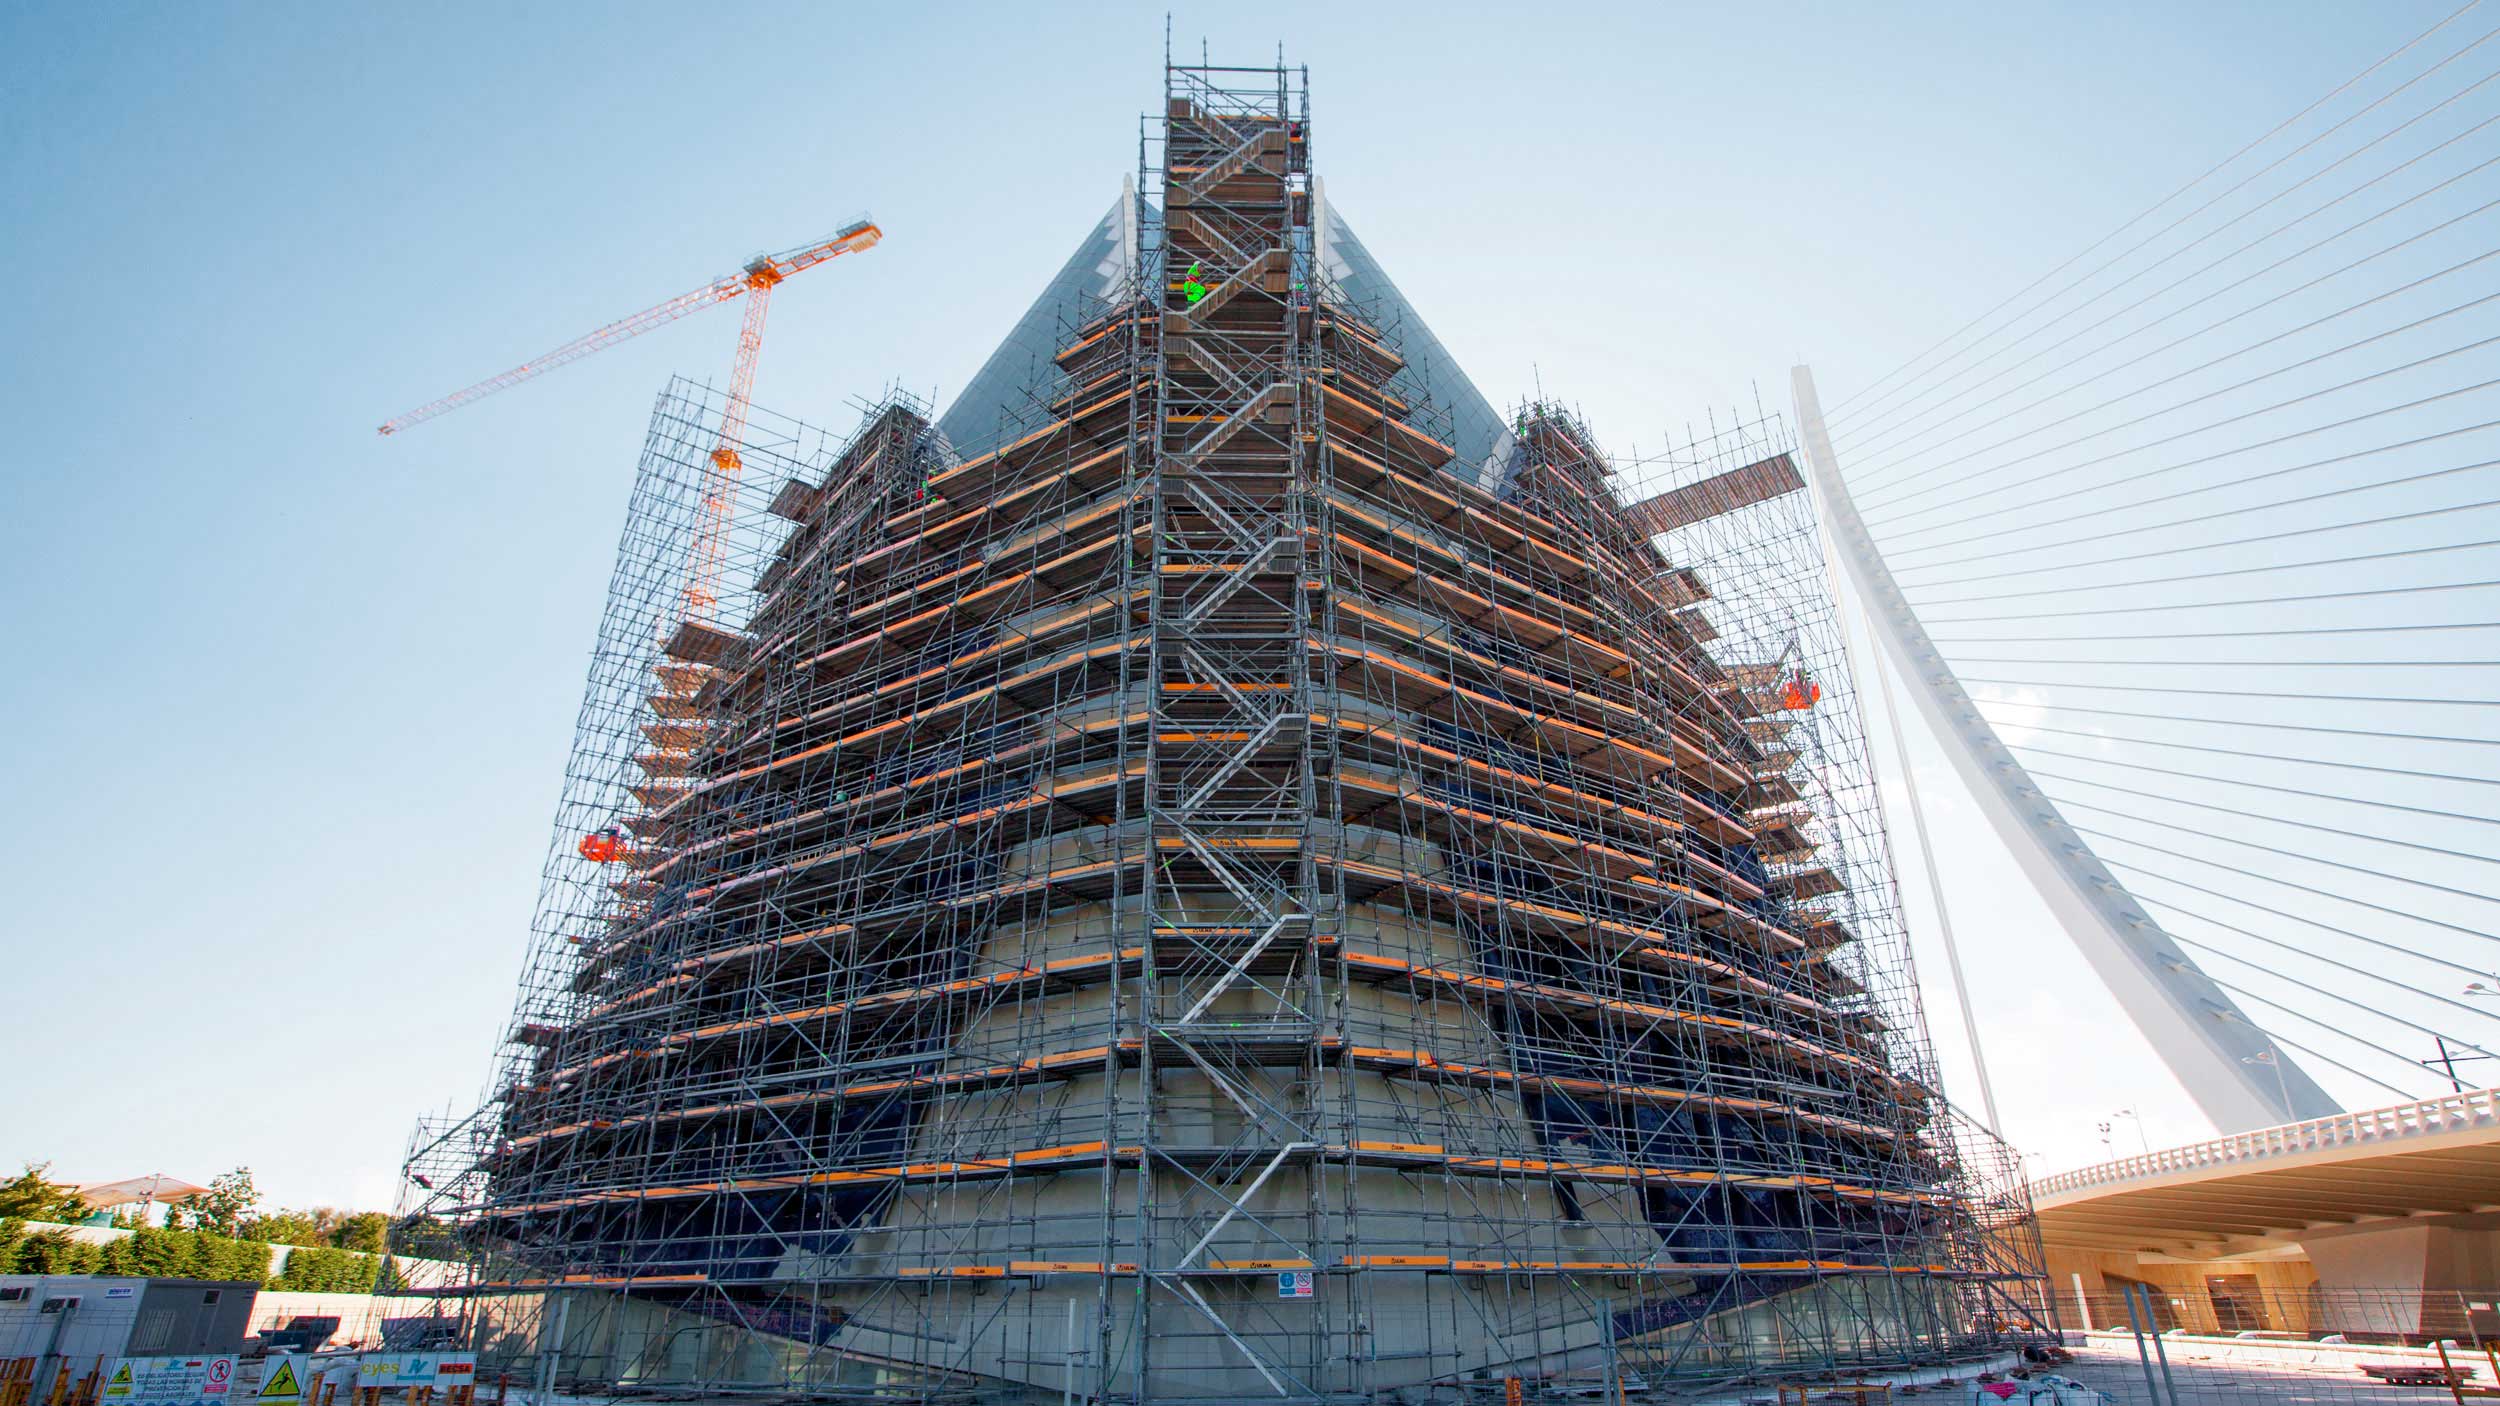 Rigid yet versatile temporary scaffolding system that provides convenient and safe areas for both work and transit. Explore the features available for ULMA Scaffolding, and feel free to request our professional advice.